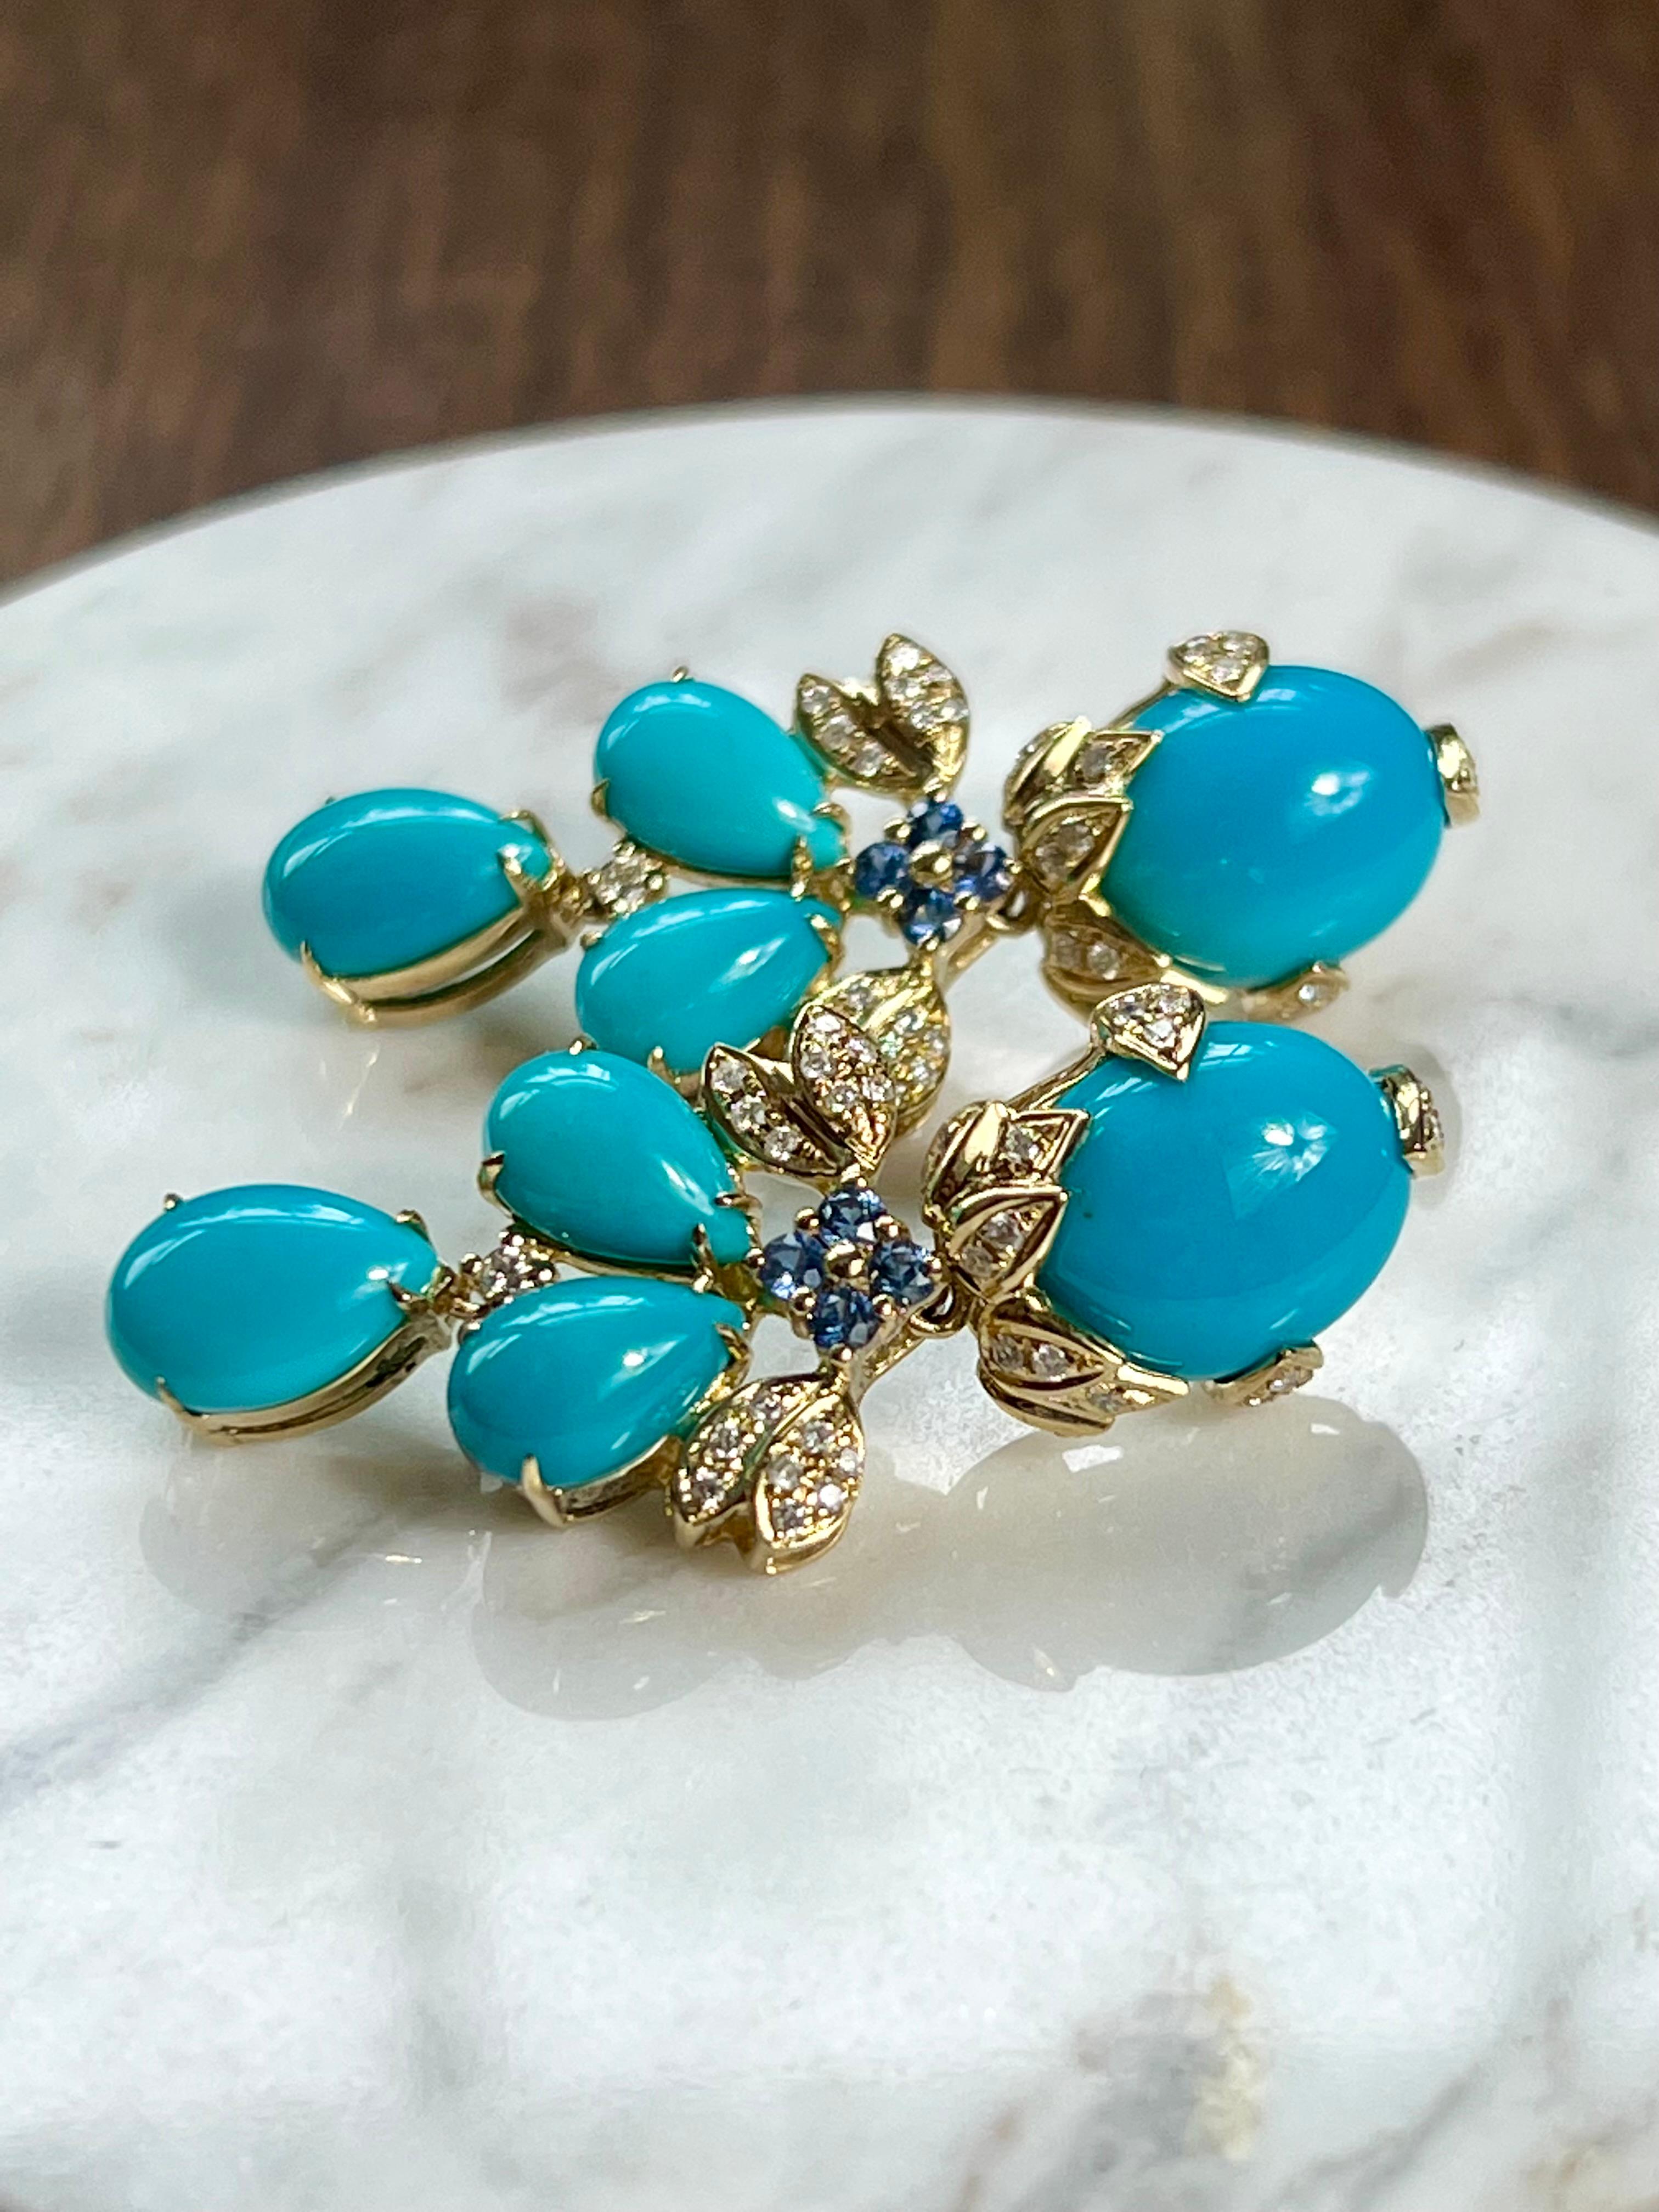 Round Cut Persian Turquoise, Sapphire and Diamond Earrings in 18 Karat Gold, 1980s